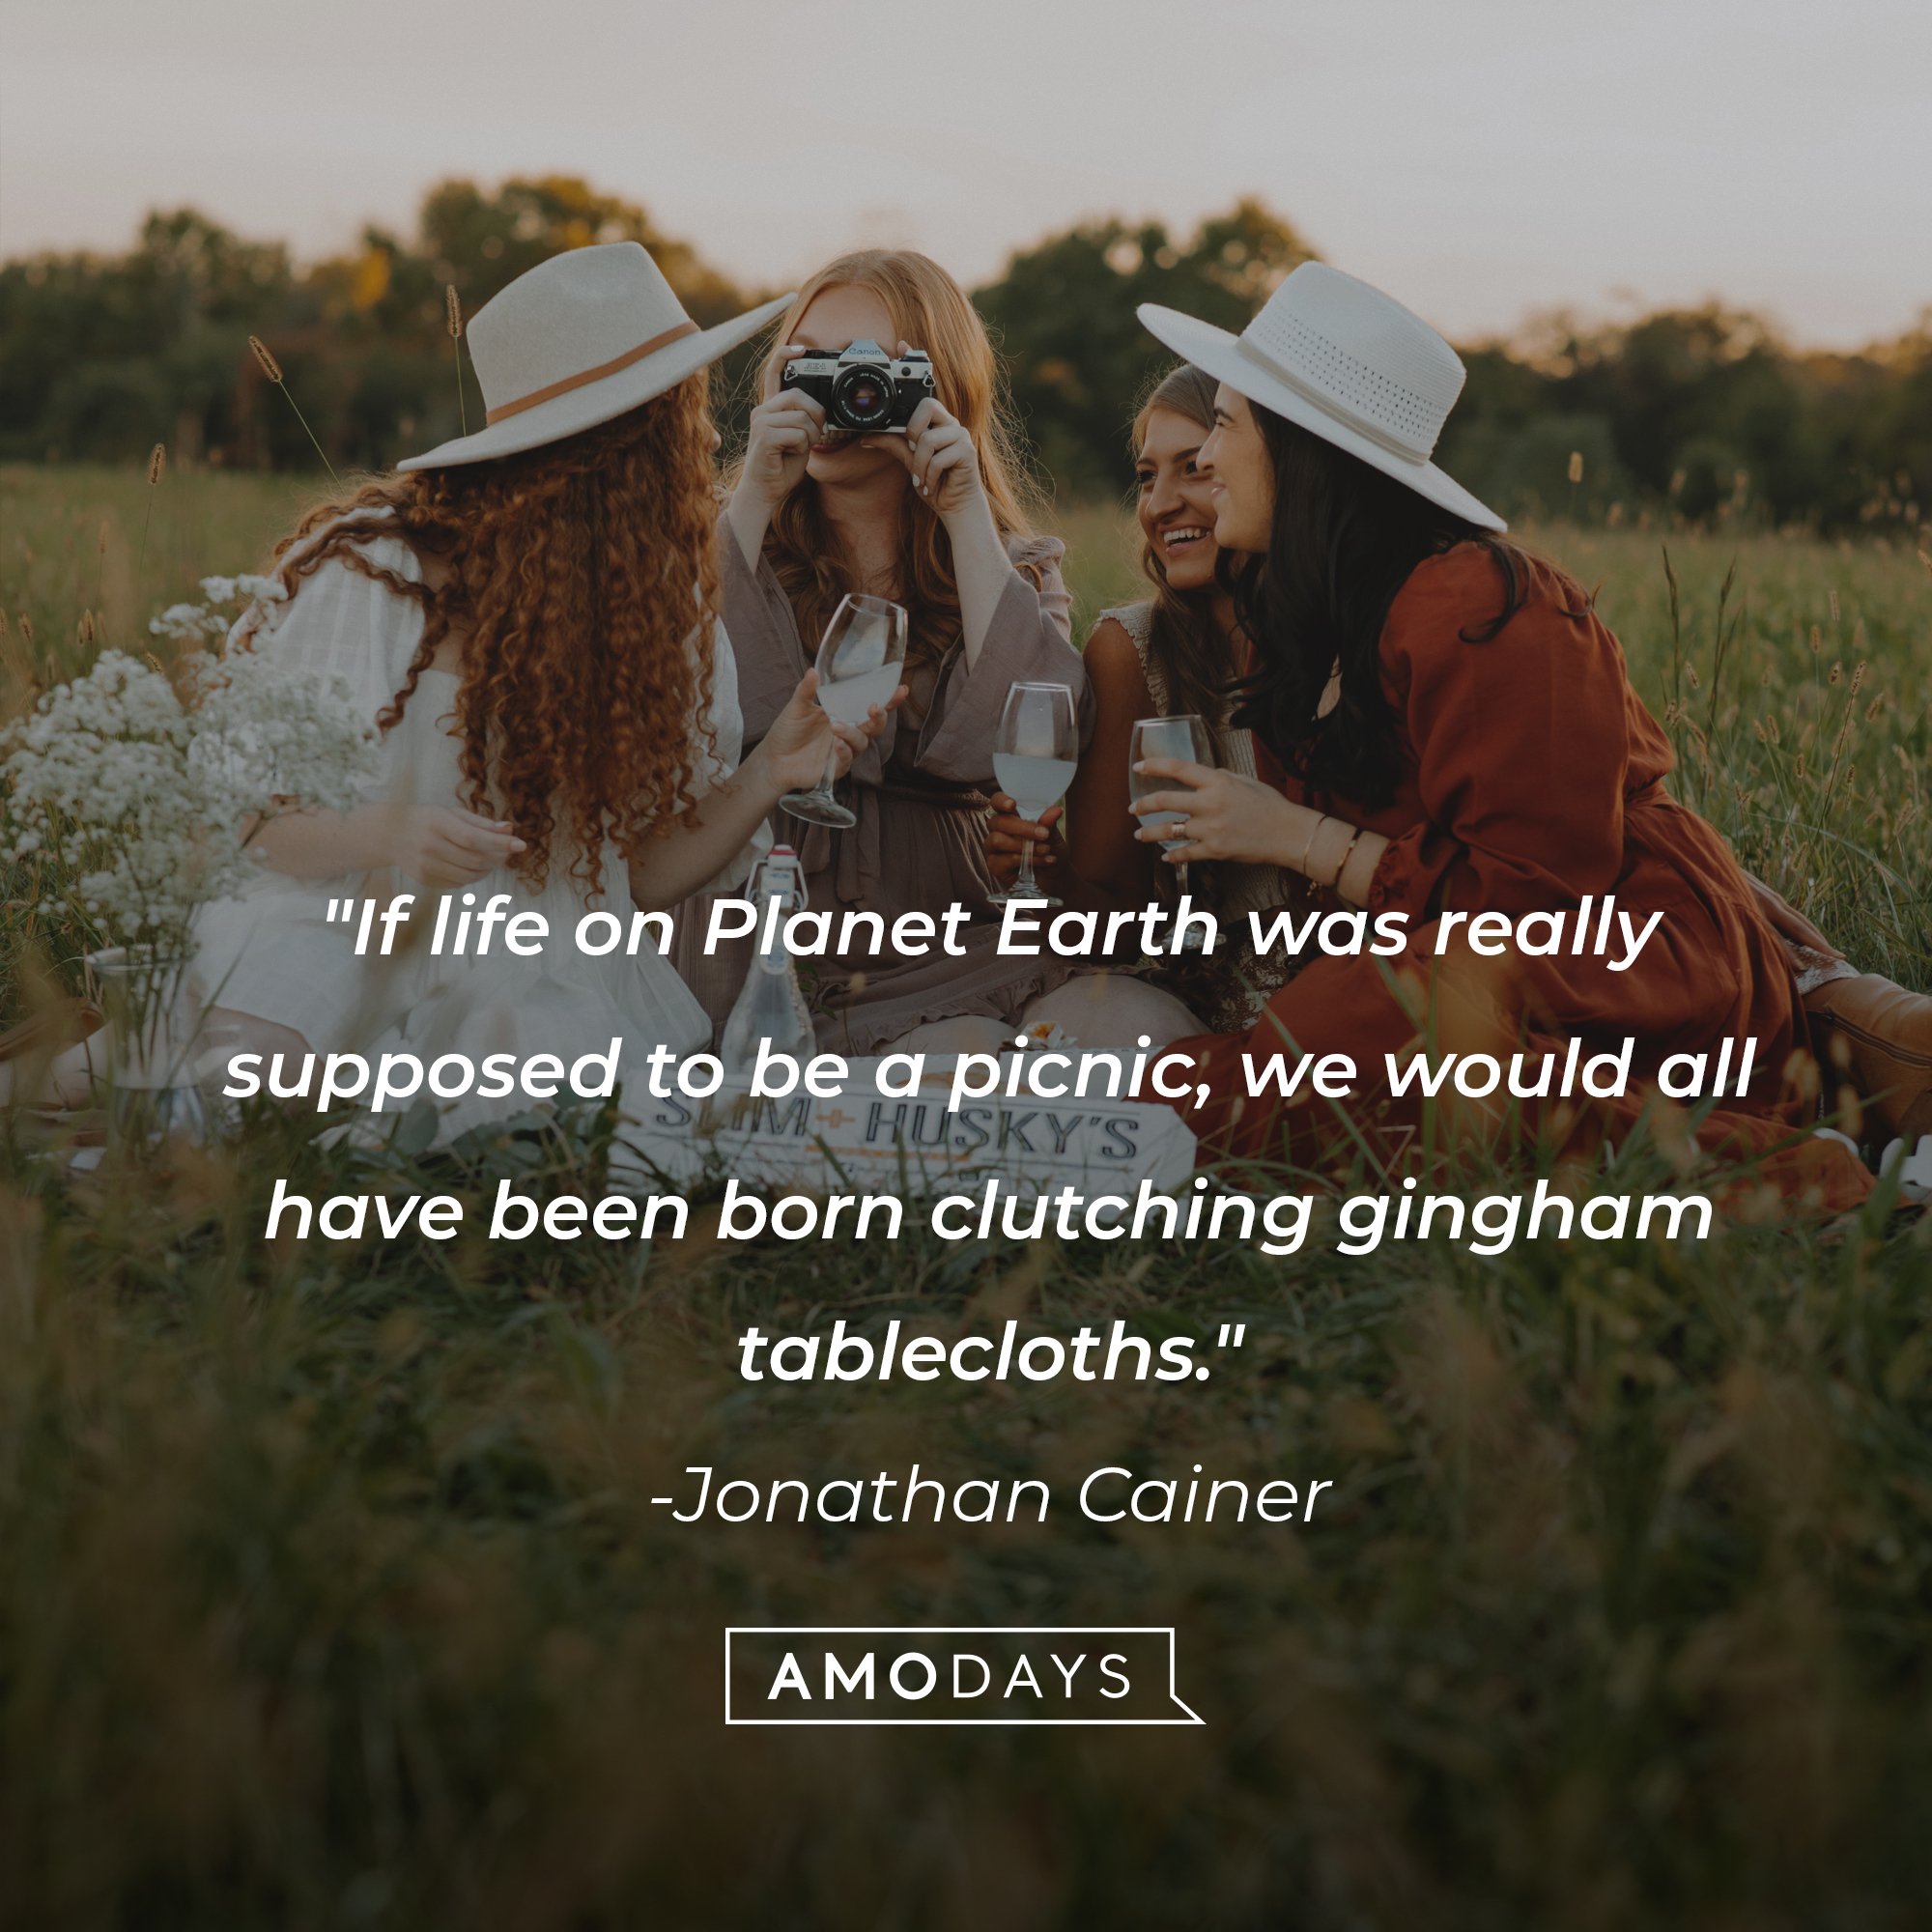 Jonathan Cainer's quote: "If life on Planet Earth was really supposed to be a picnic, we would all have been born clutching gingham tablecloths." | Image: AmoDays